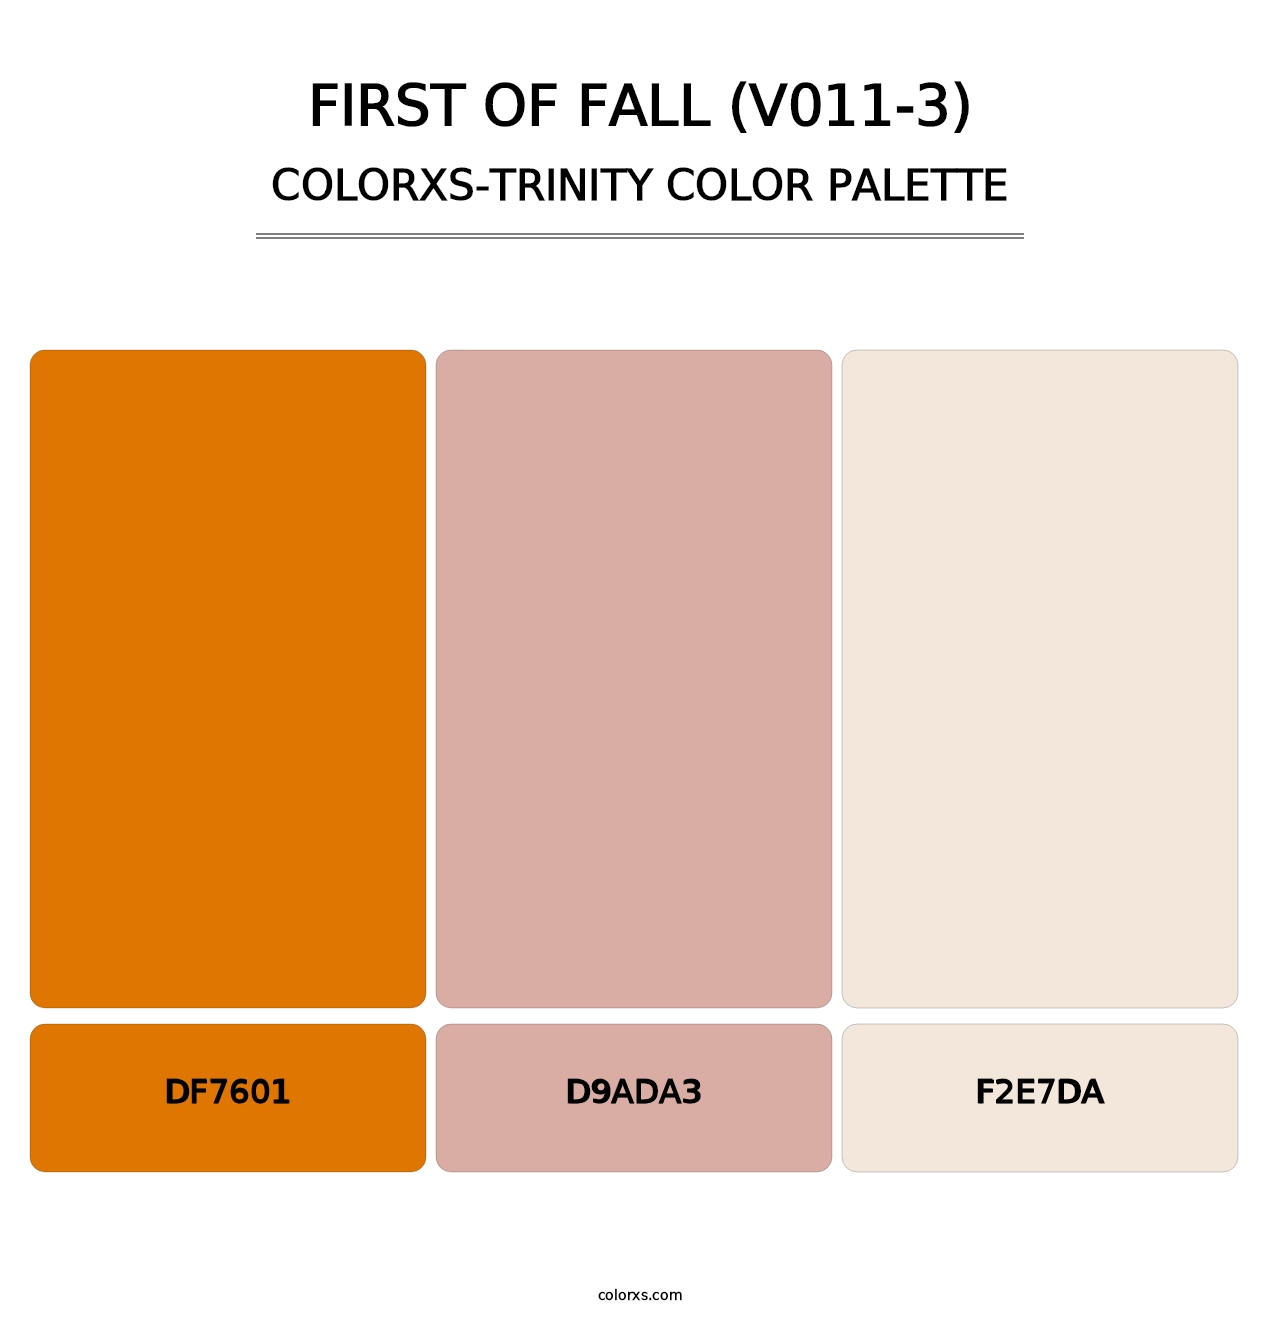 First of Fall (V011-3) - Colorxs Trinity Palette